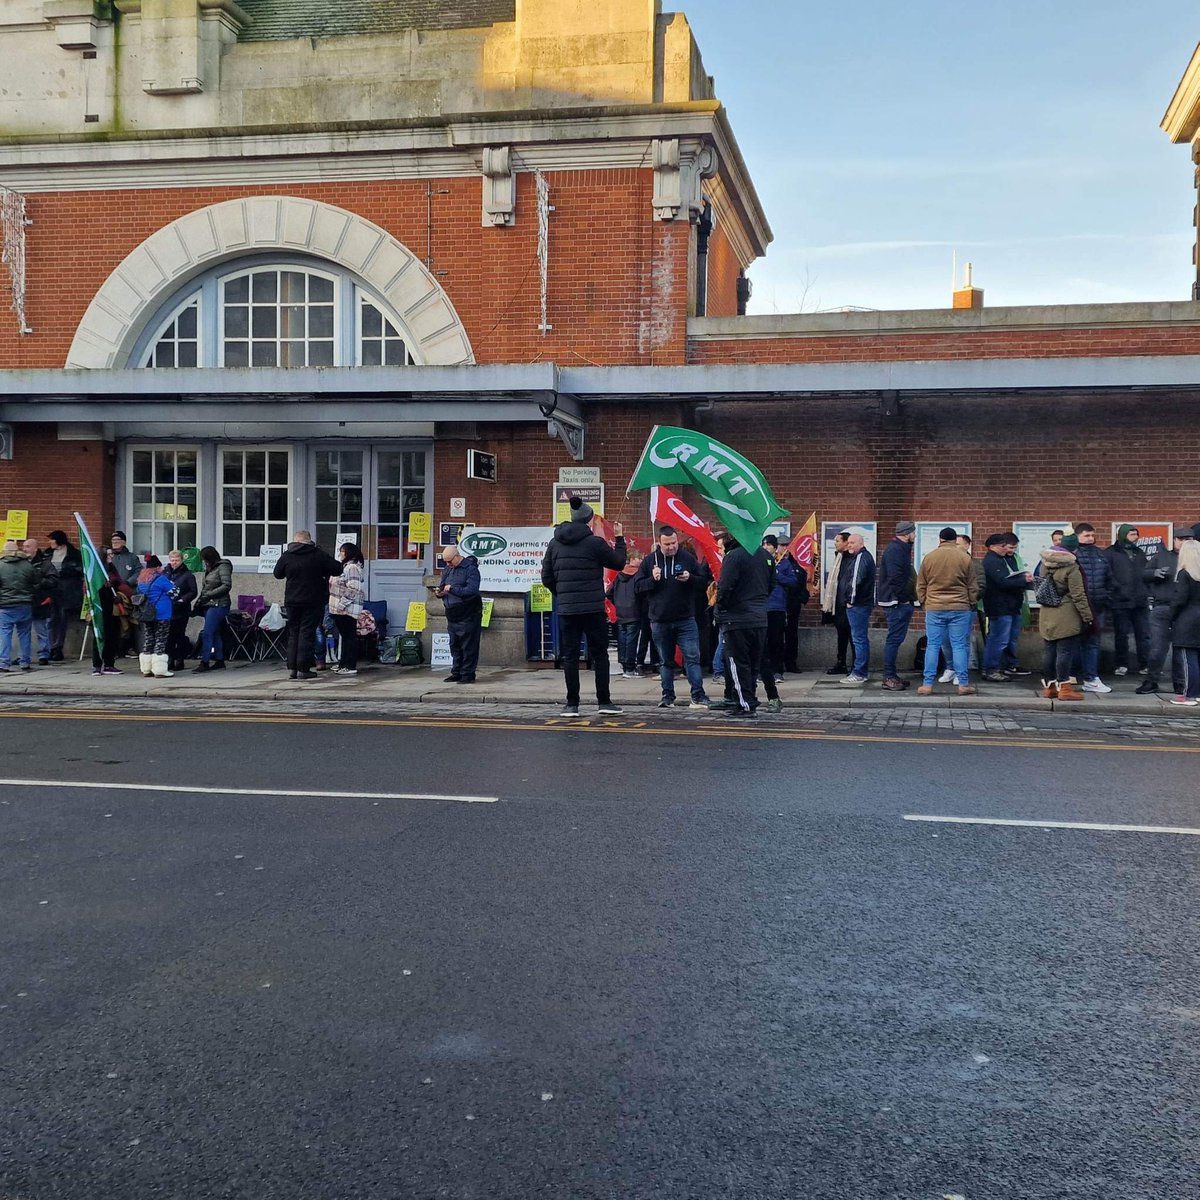 Strong picket line at Tunbridge Wells this morning! Keep up the fight💪  @RMTunion
#TunbridgeWells
#SupportRailWorkers
#SupportTheStrikes 
#railstrike 
#Strikers #UnionStrong